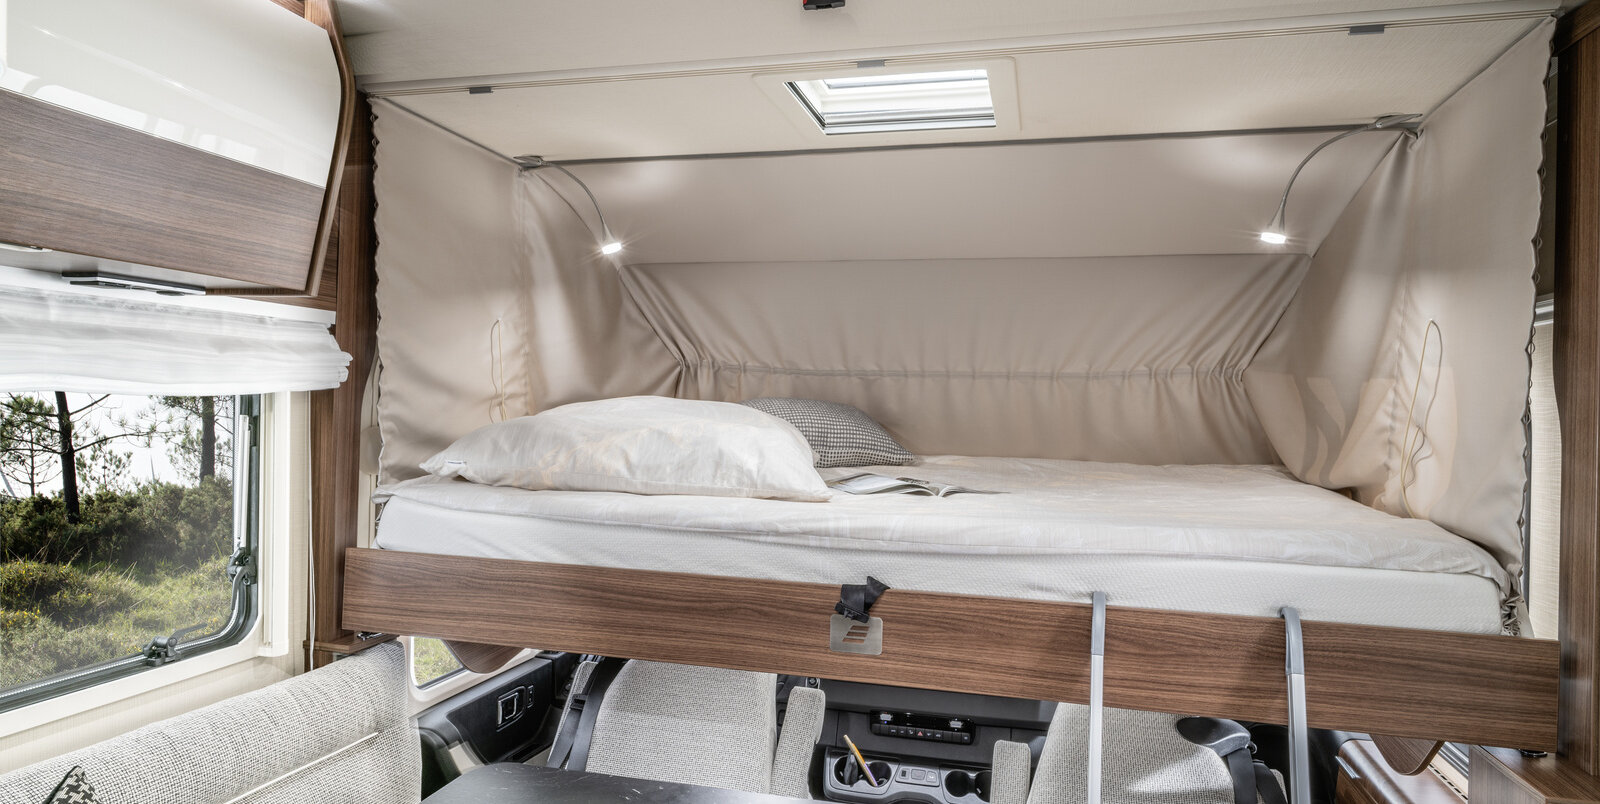 Fold-down bed over the driver's cab area in the HYMER B-Class ModernComfort I 580